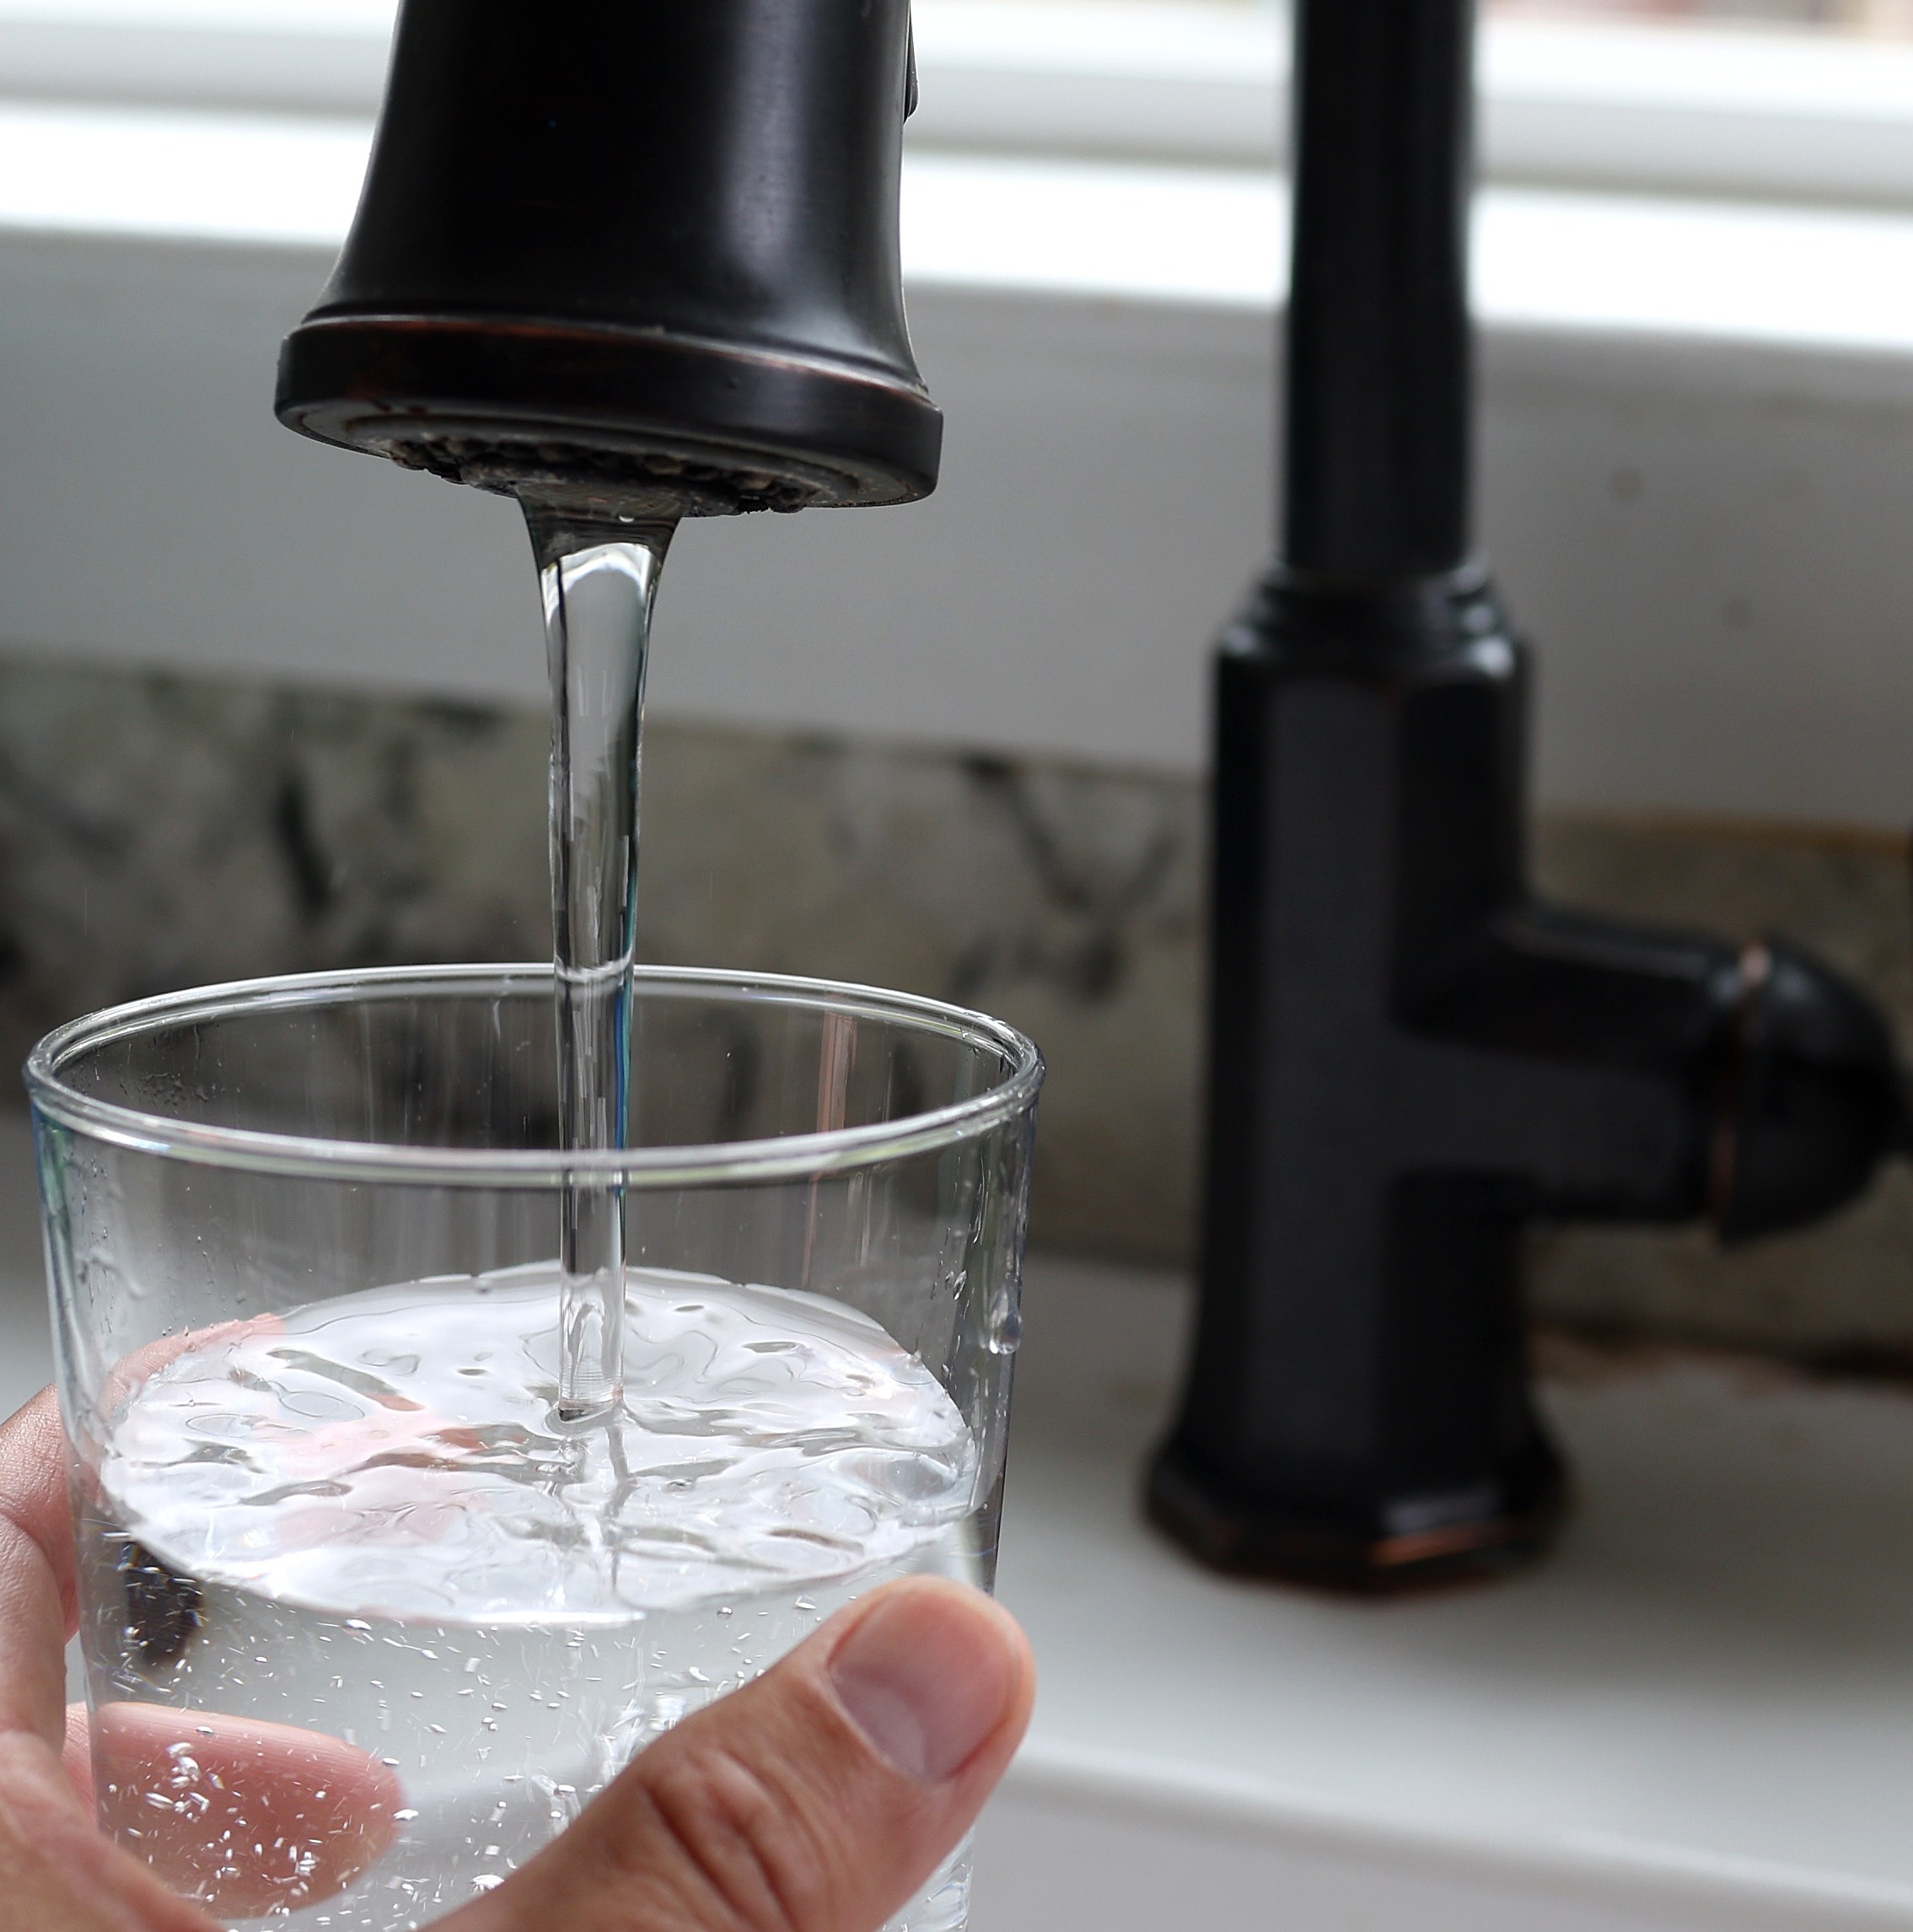 What to do if you’re worried about “forever chemicals” in your drinking water